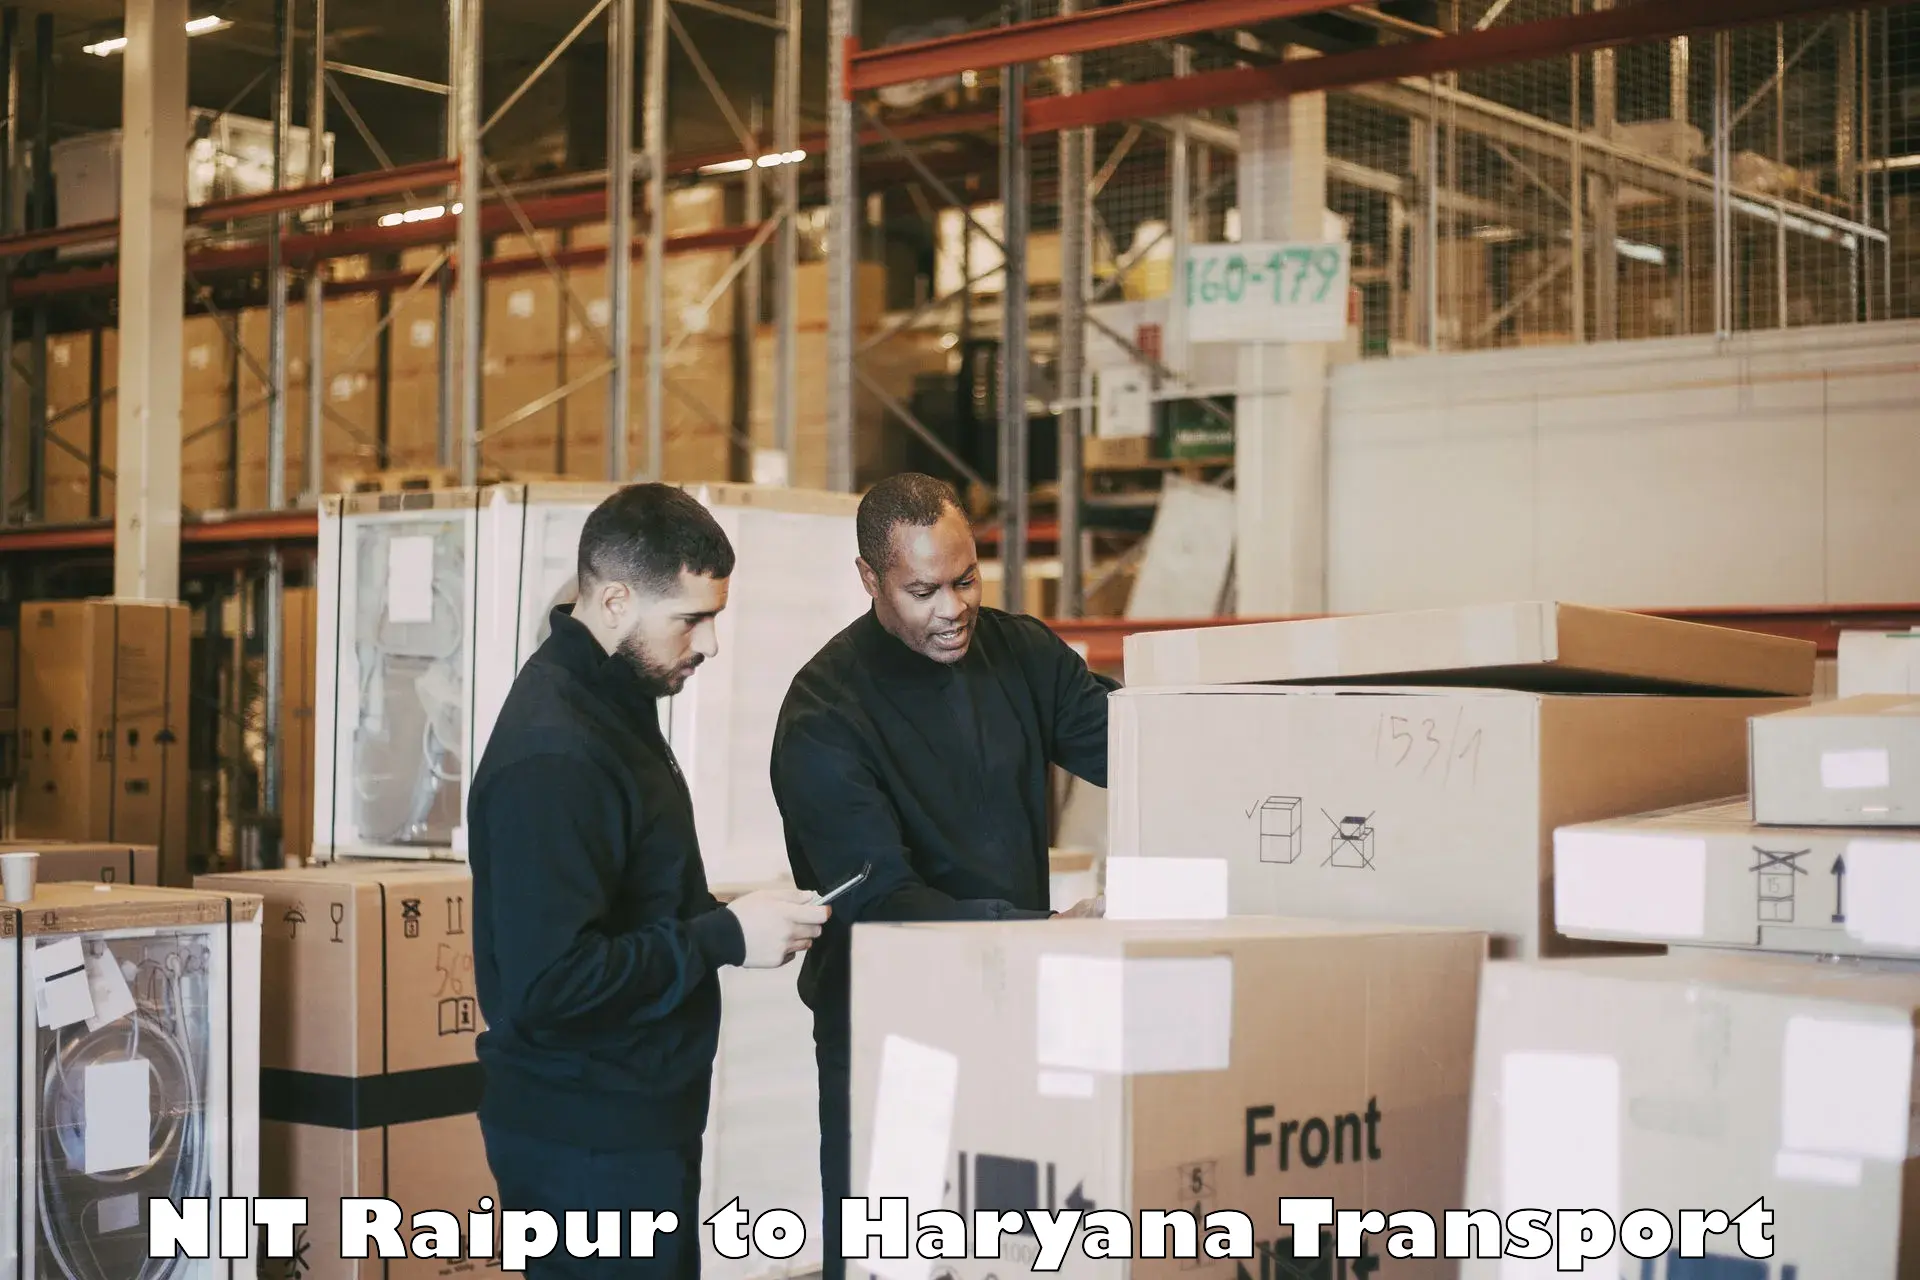 Container transportation services NIT Raipur to NCR Haryana